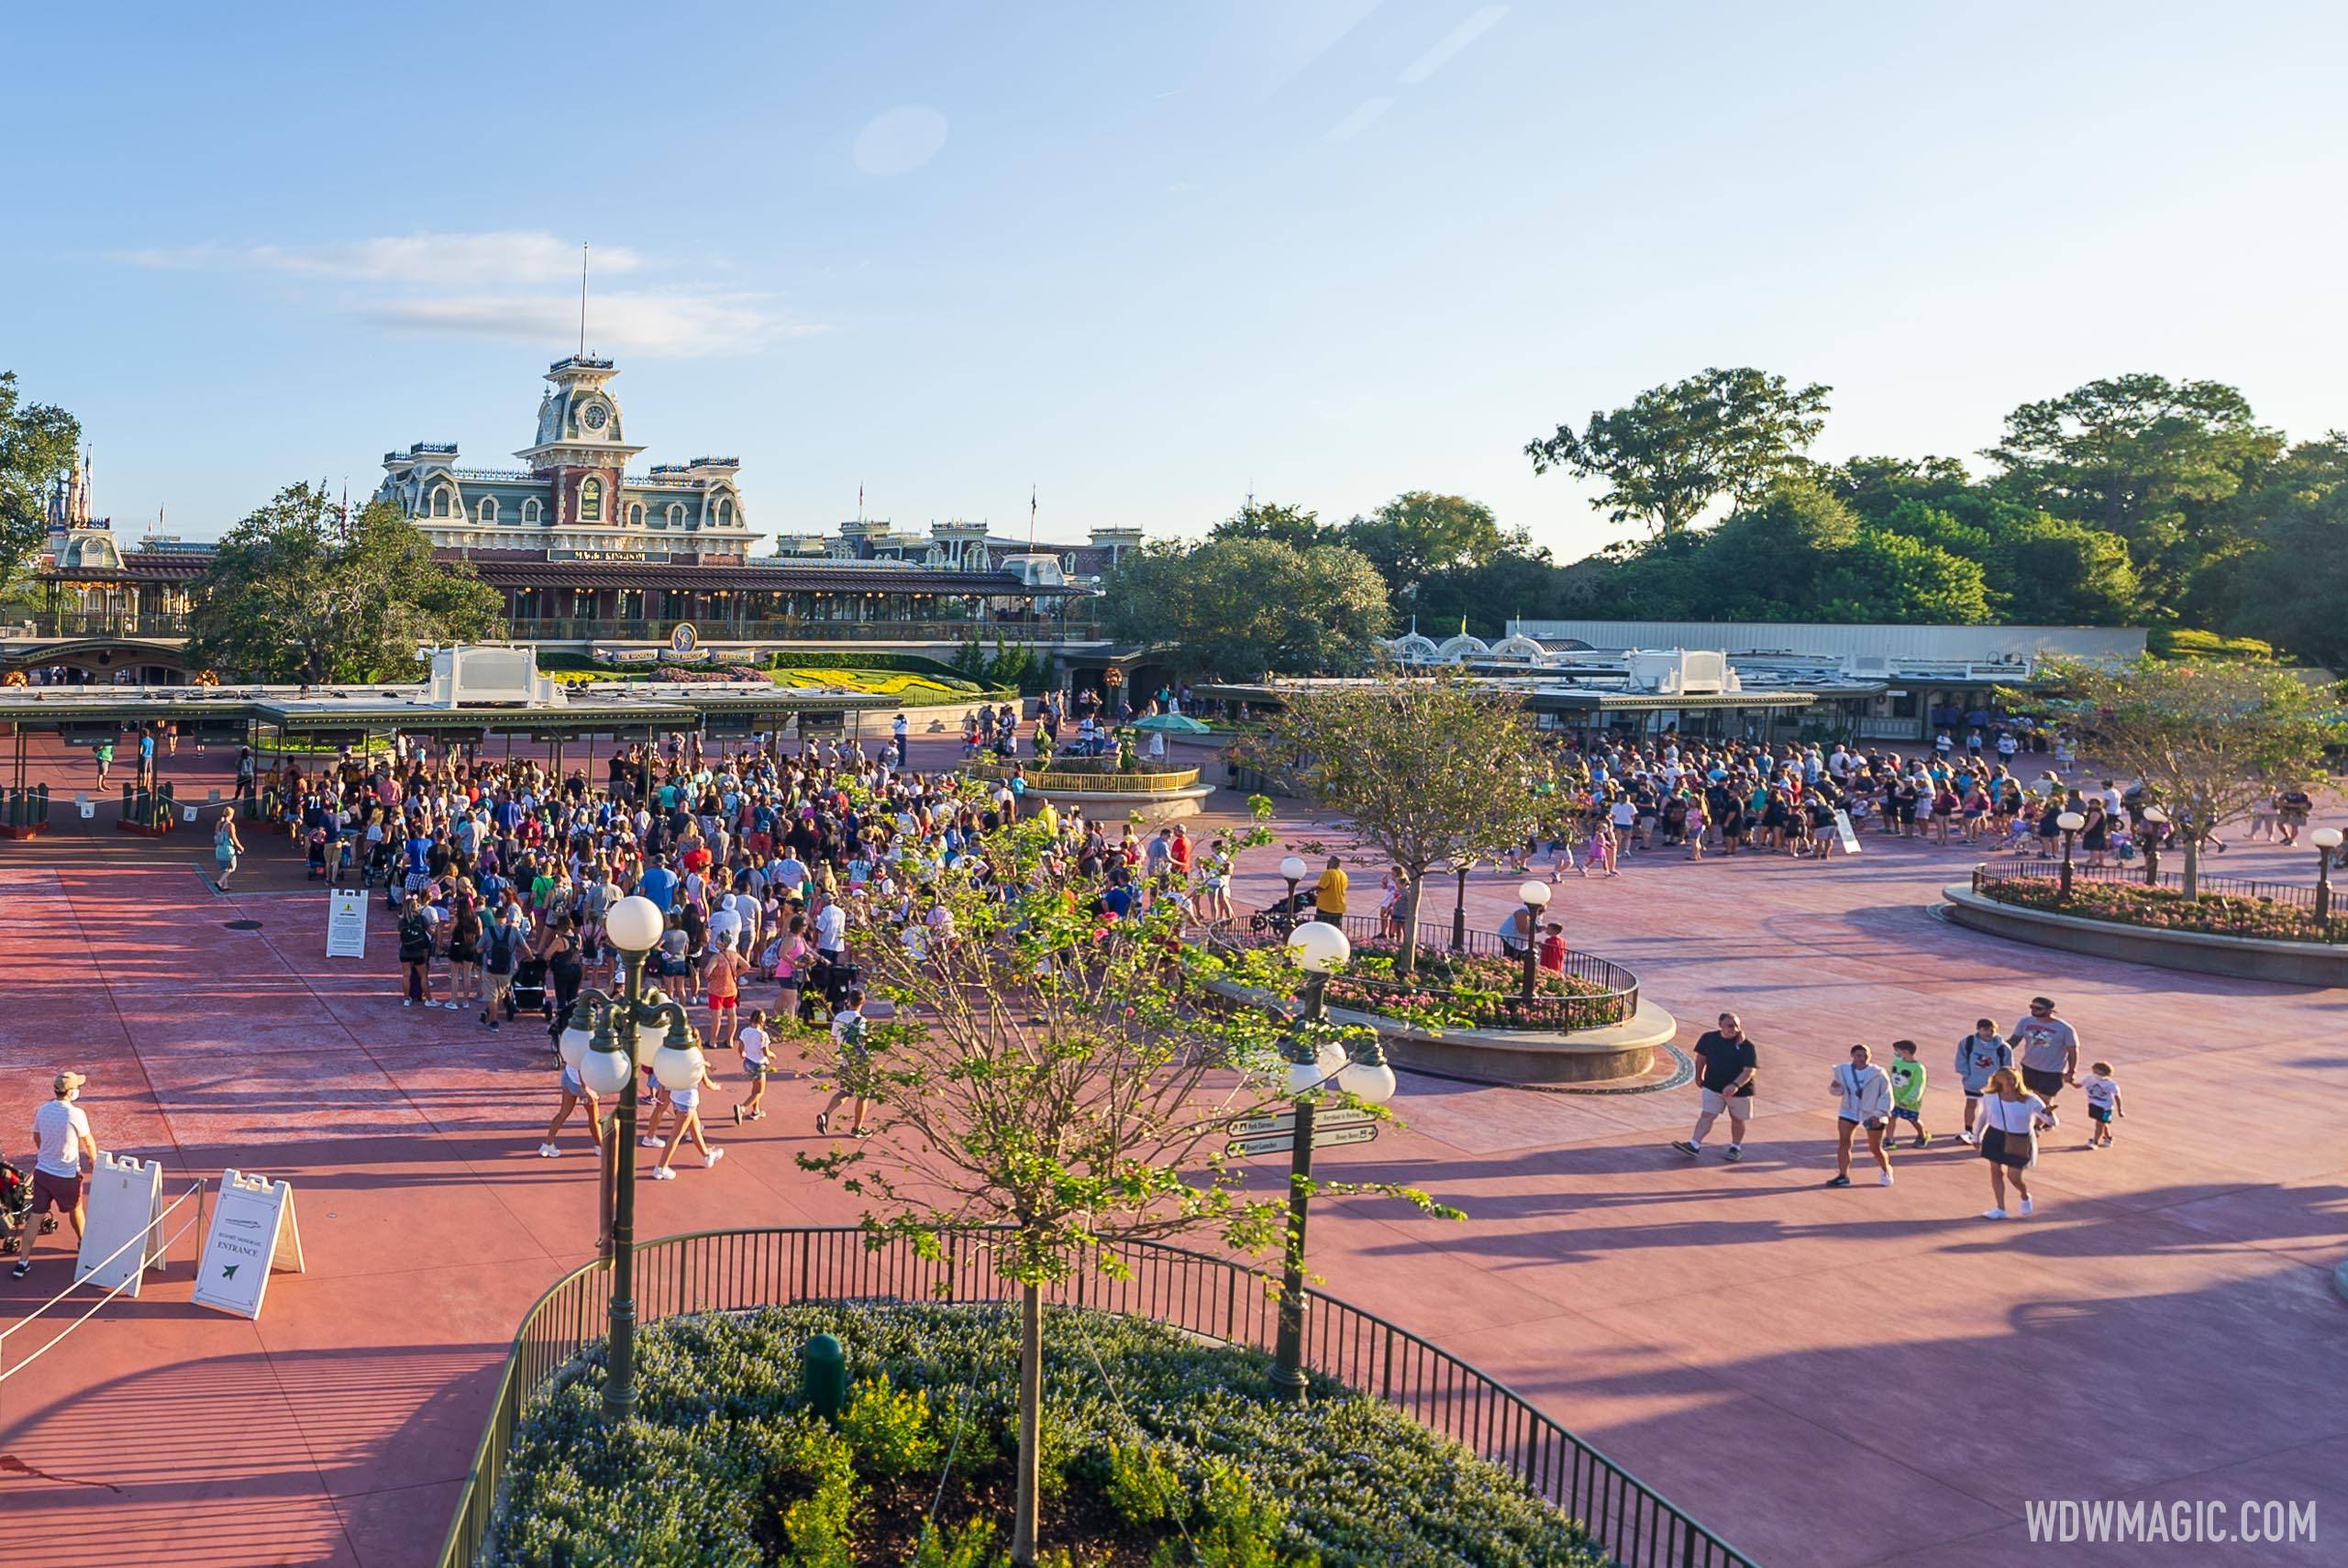 More offsite hotels join Disney hotels for Early Morning Hours at Walt Disney World theme parks through 2024